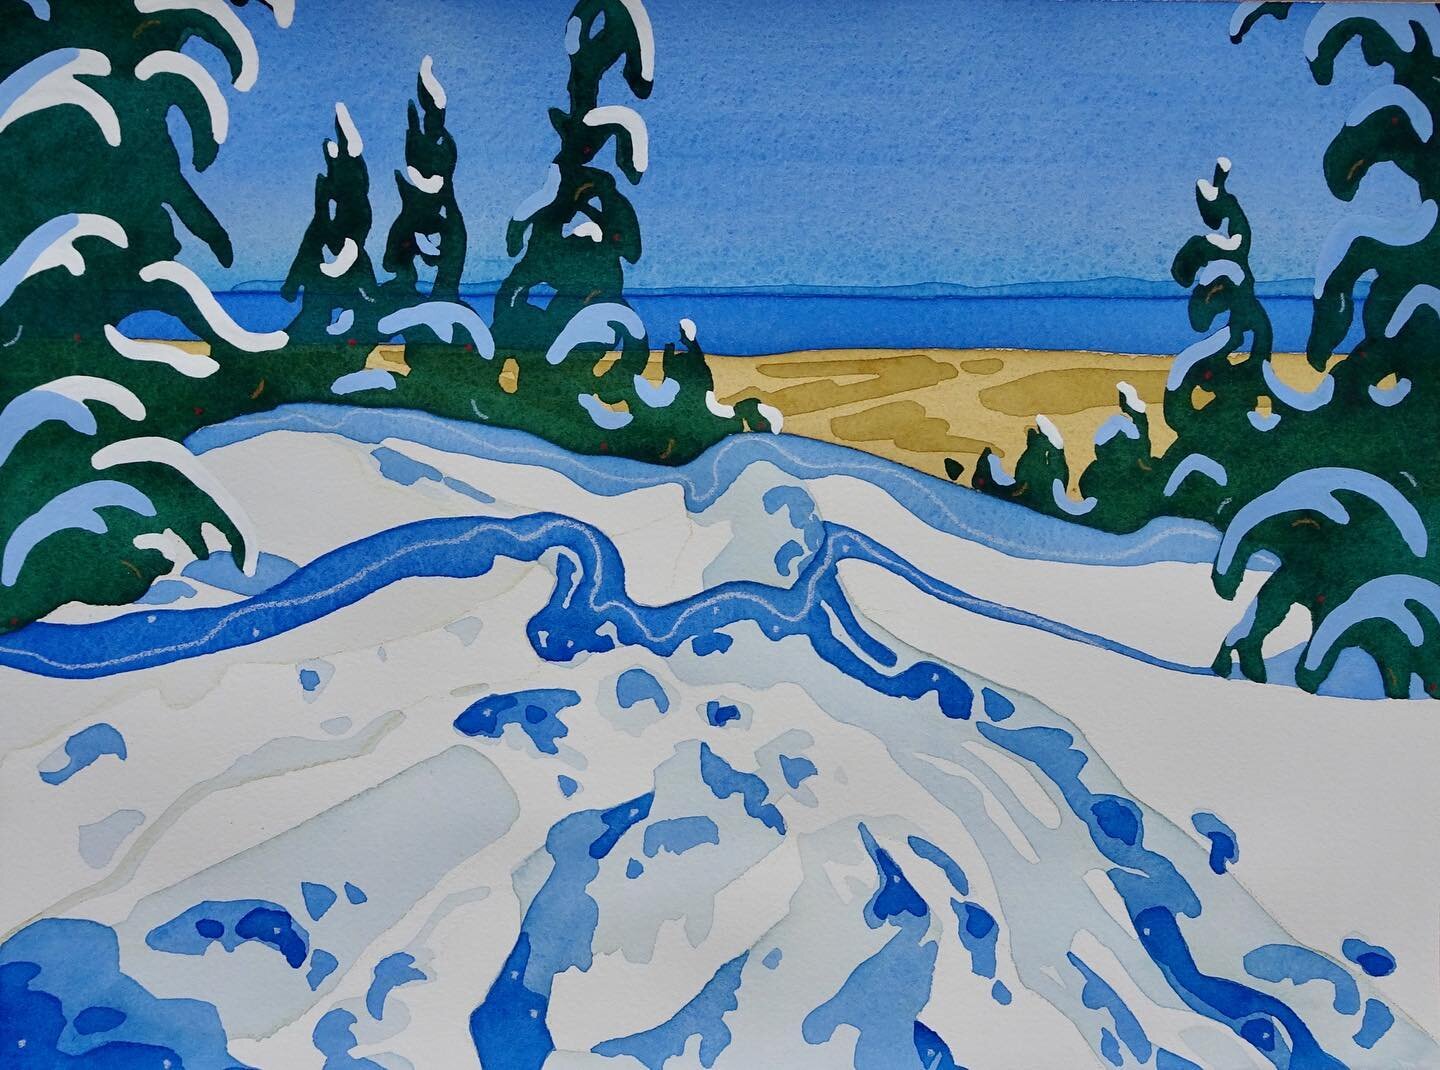 There is nothing like a Bluebird day!! The snow is fresh, the blue of the bay and the shadows in the snow are so intense. I can never get enough of this kind of day😊 #gillcameronart #gillcameronwatercolourartist #canadianartist #ontarioartist #canad